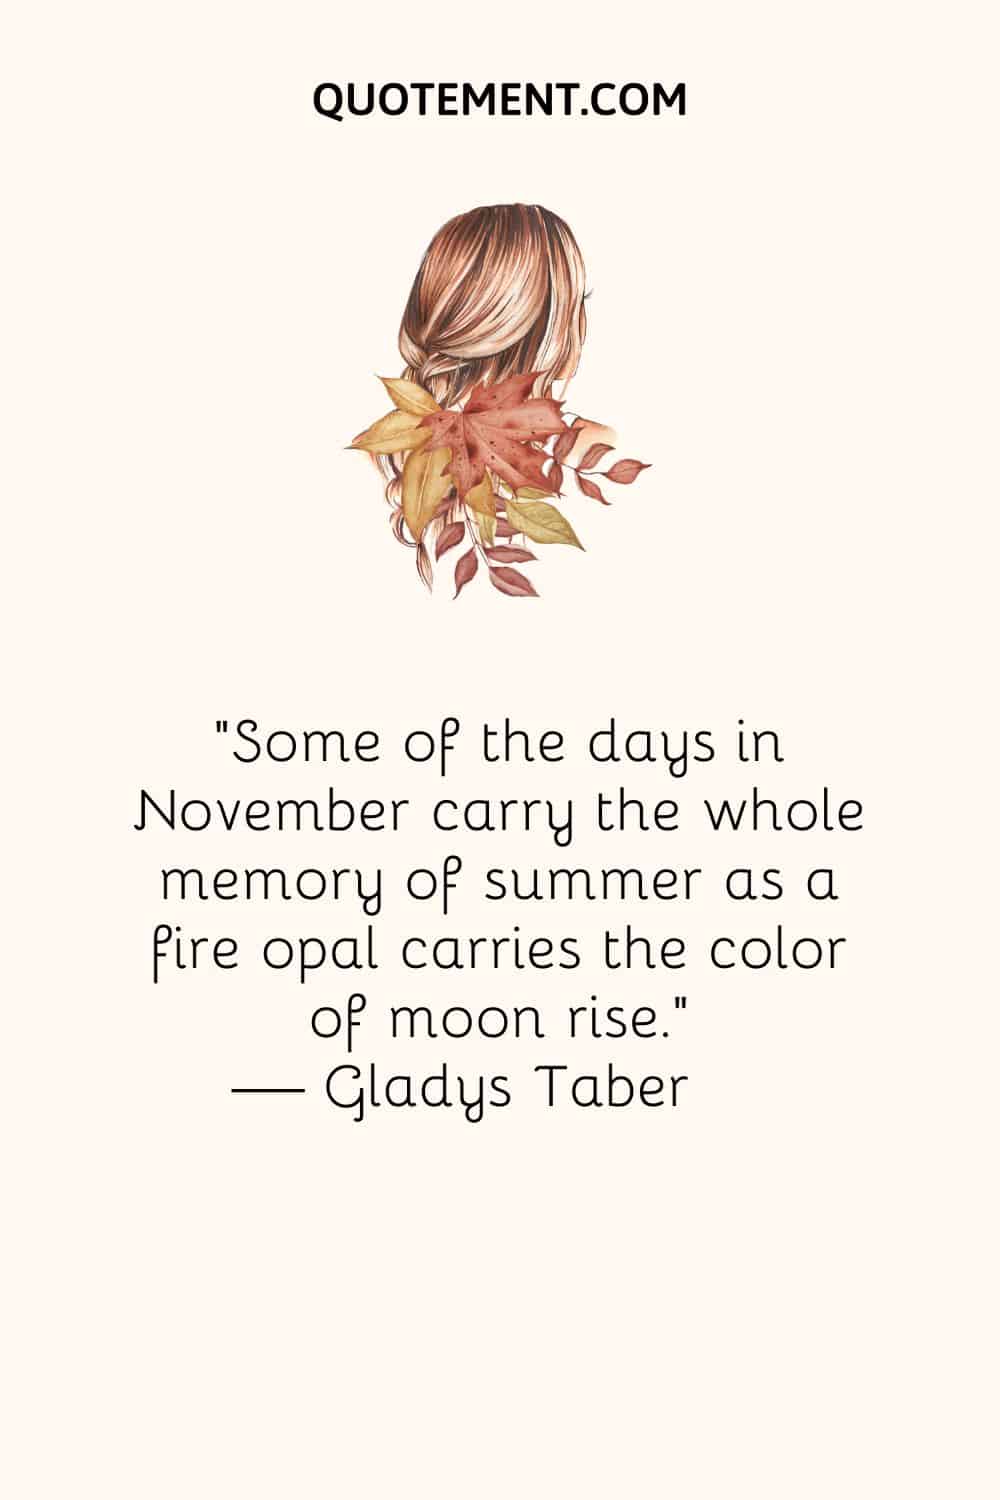 Some of the days in November carry the whole memory of summer as a fire opal carries the color of moon rise